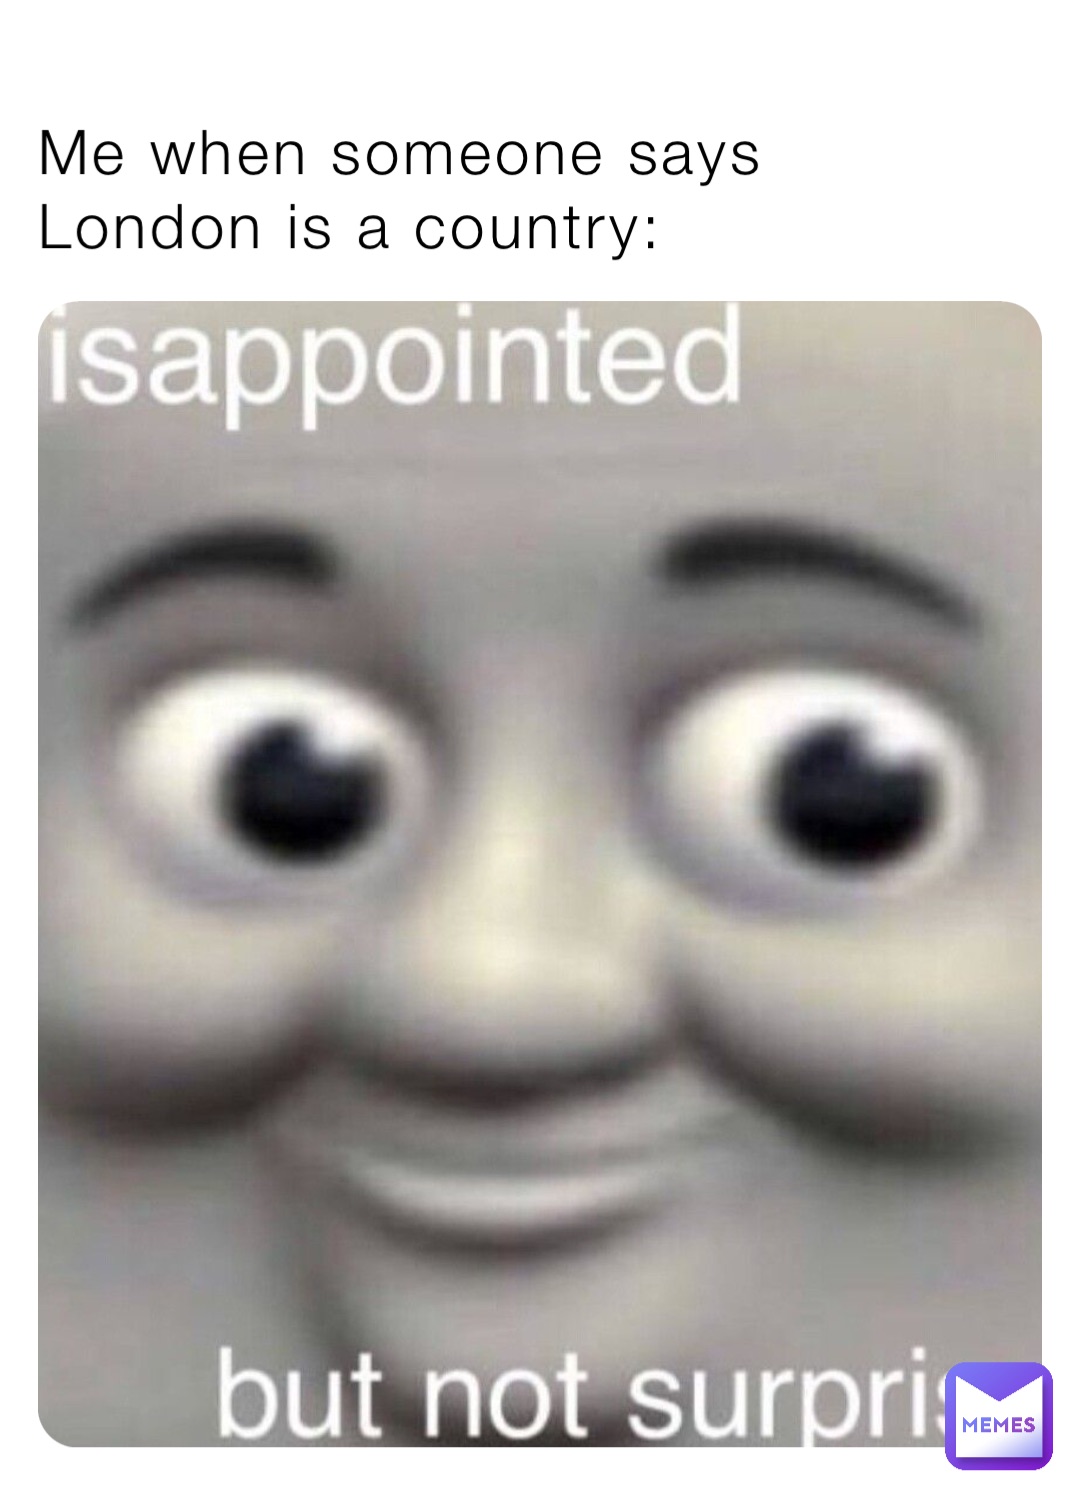 Me when someone says London is a country: